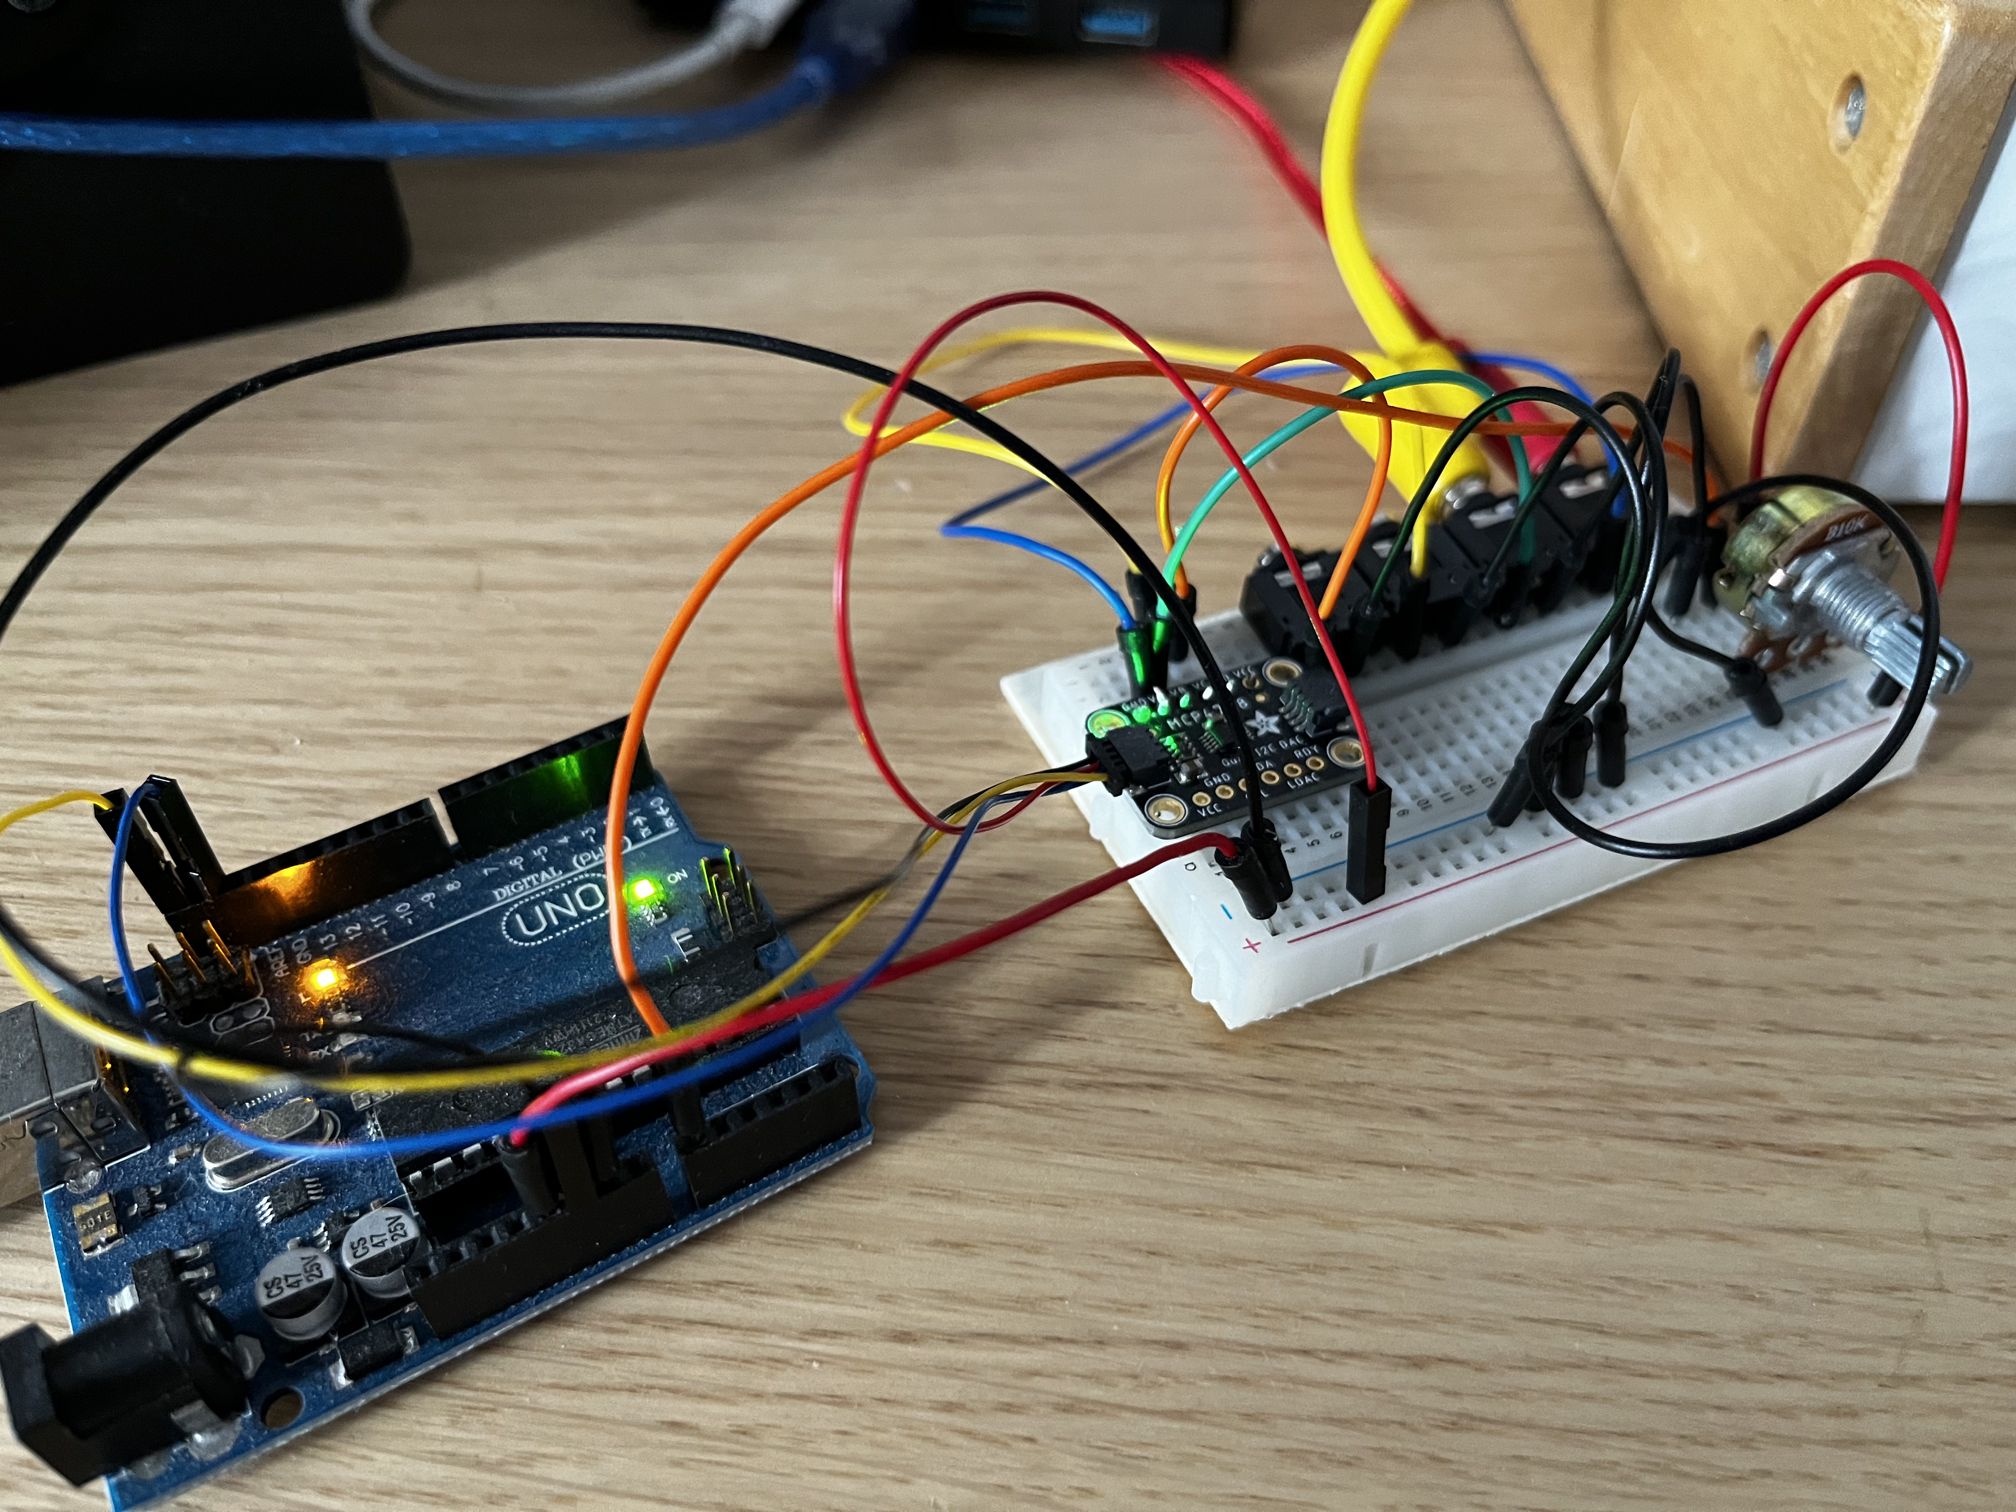 An Arduino microcontroller and a breadboard with an even smaller chip, a bunch of sockets and a rotary pot, all connected with colourful jumper leads